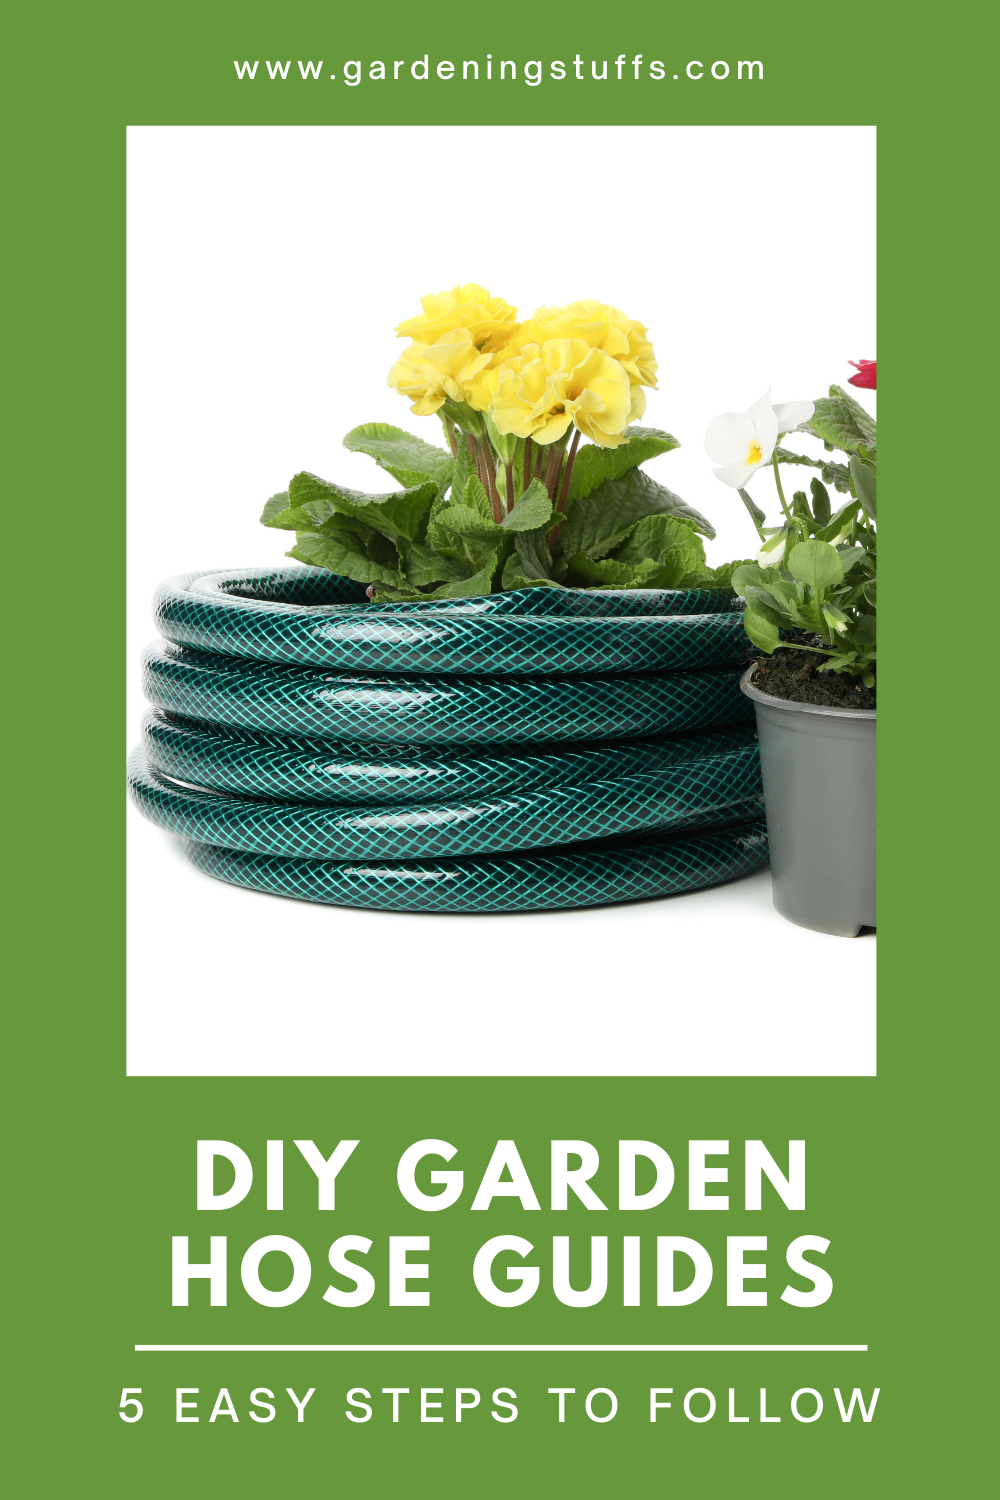 Now each garden is different from another one, while some gardens may require a smaller hose and the others might require a longer hose. In this article, we’ve listed the process to build your own garden hose to meet your custom garden requirements.